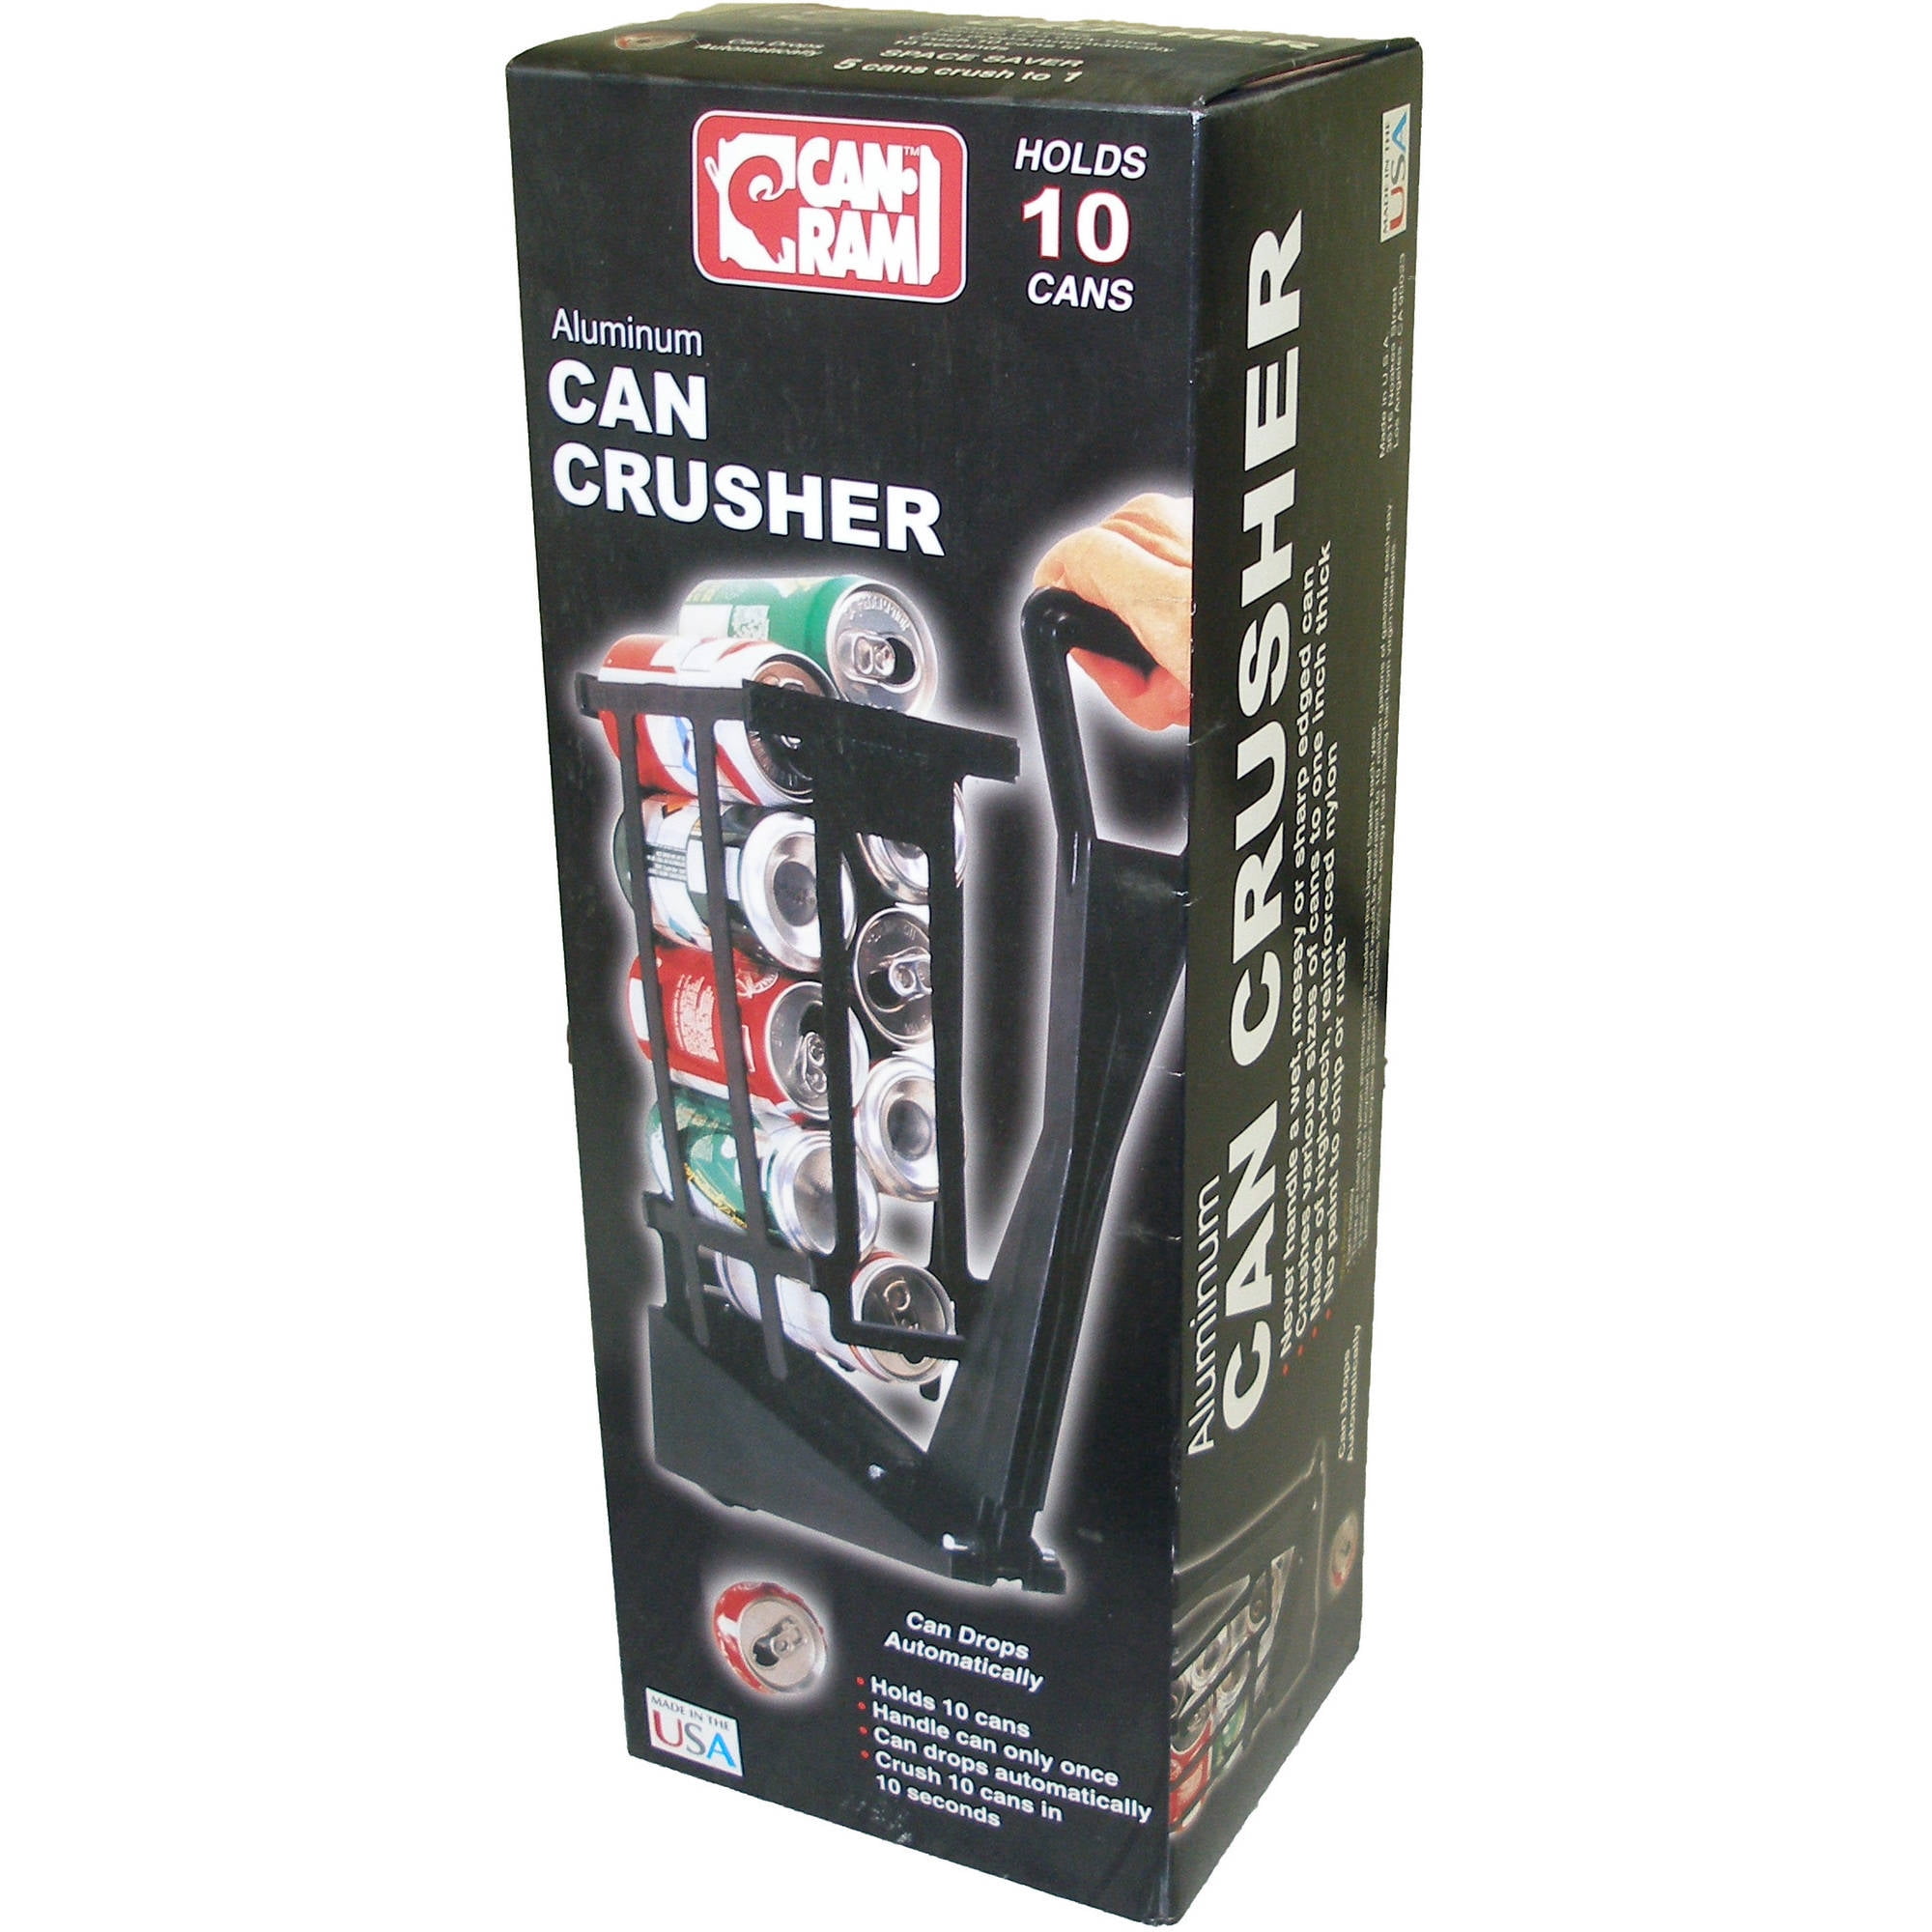 Can-ram Aluminum for Can Crusher Crush 10 Cans in 10 Seconds 